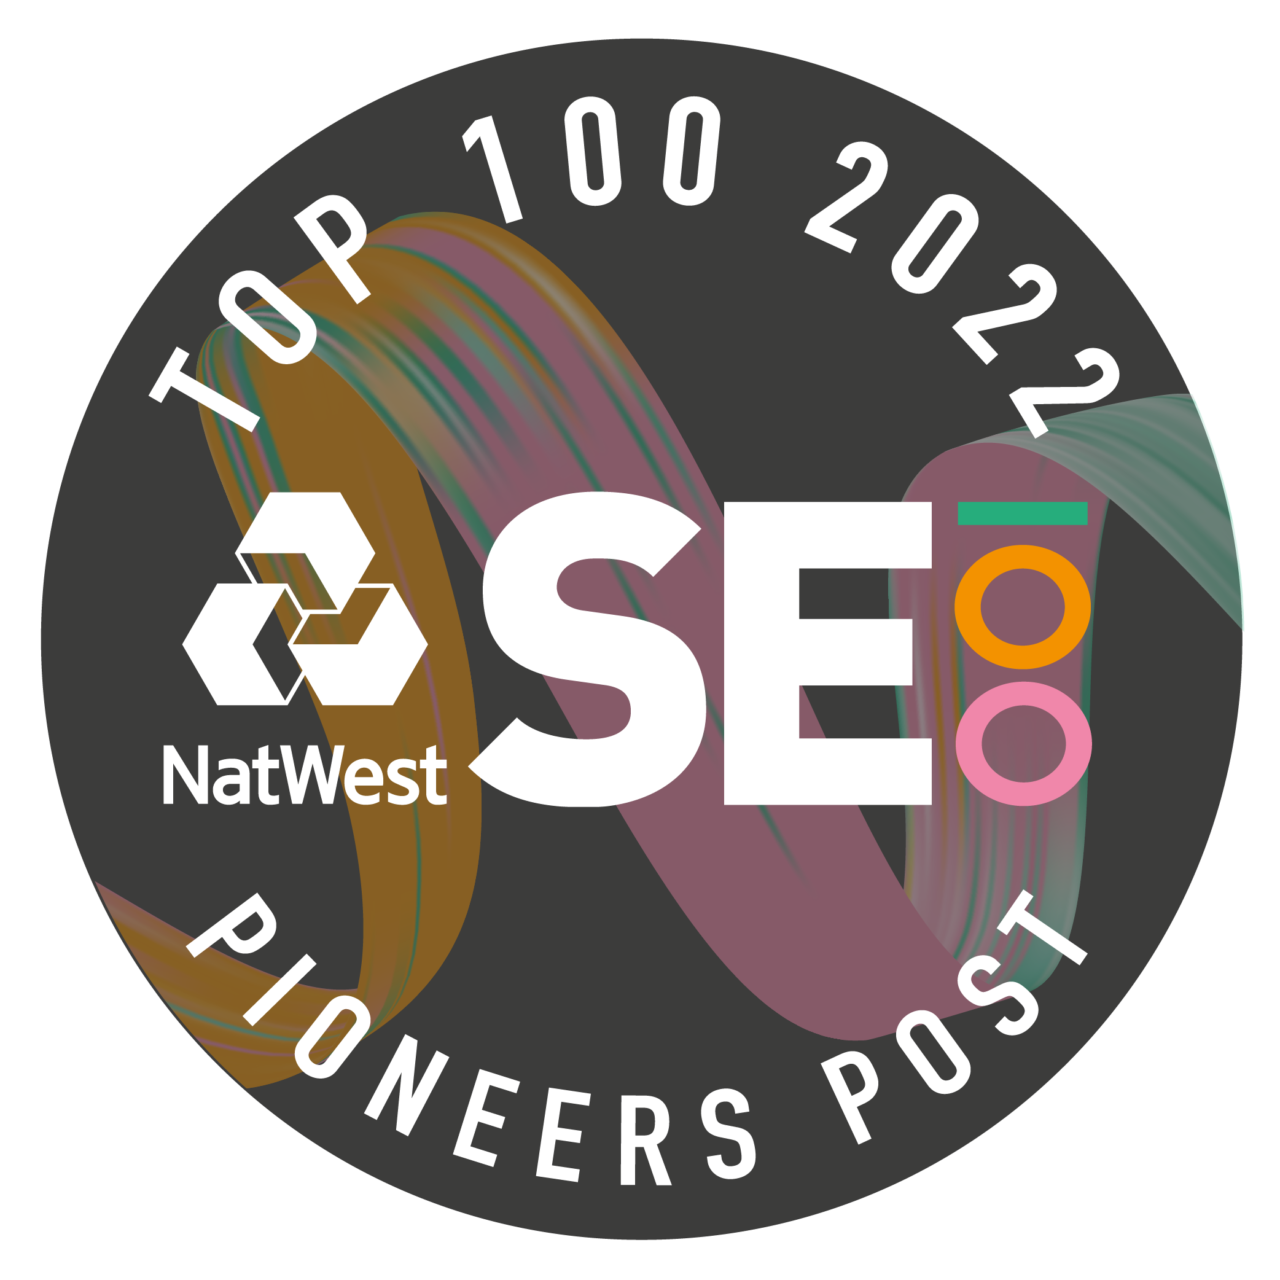 we-have-been-named-one-of-the-top-100-social-enterprises-in-the-se100-index-and-social-business-awards-run-by-natwest-and-pioneers-post